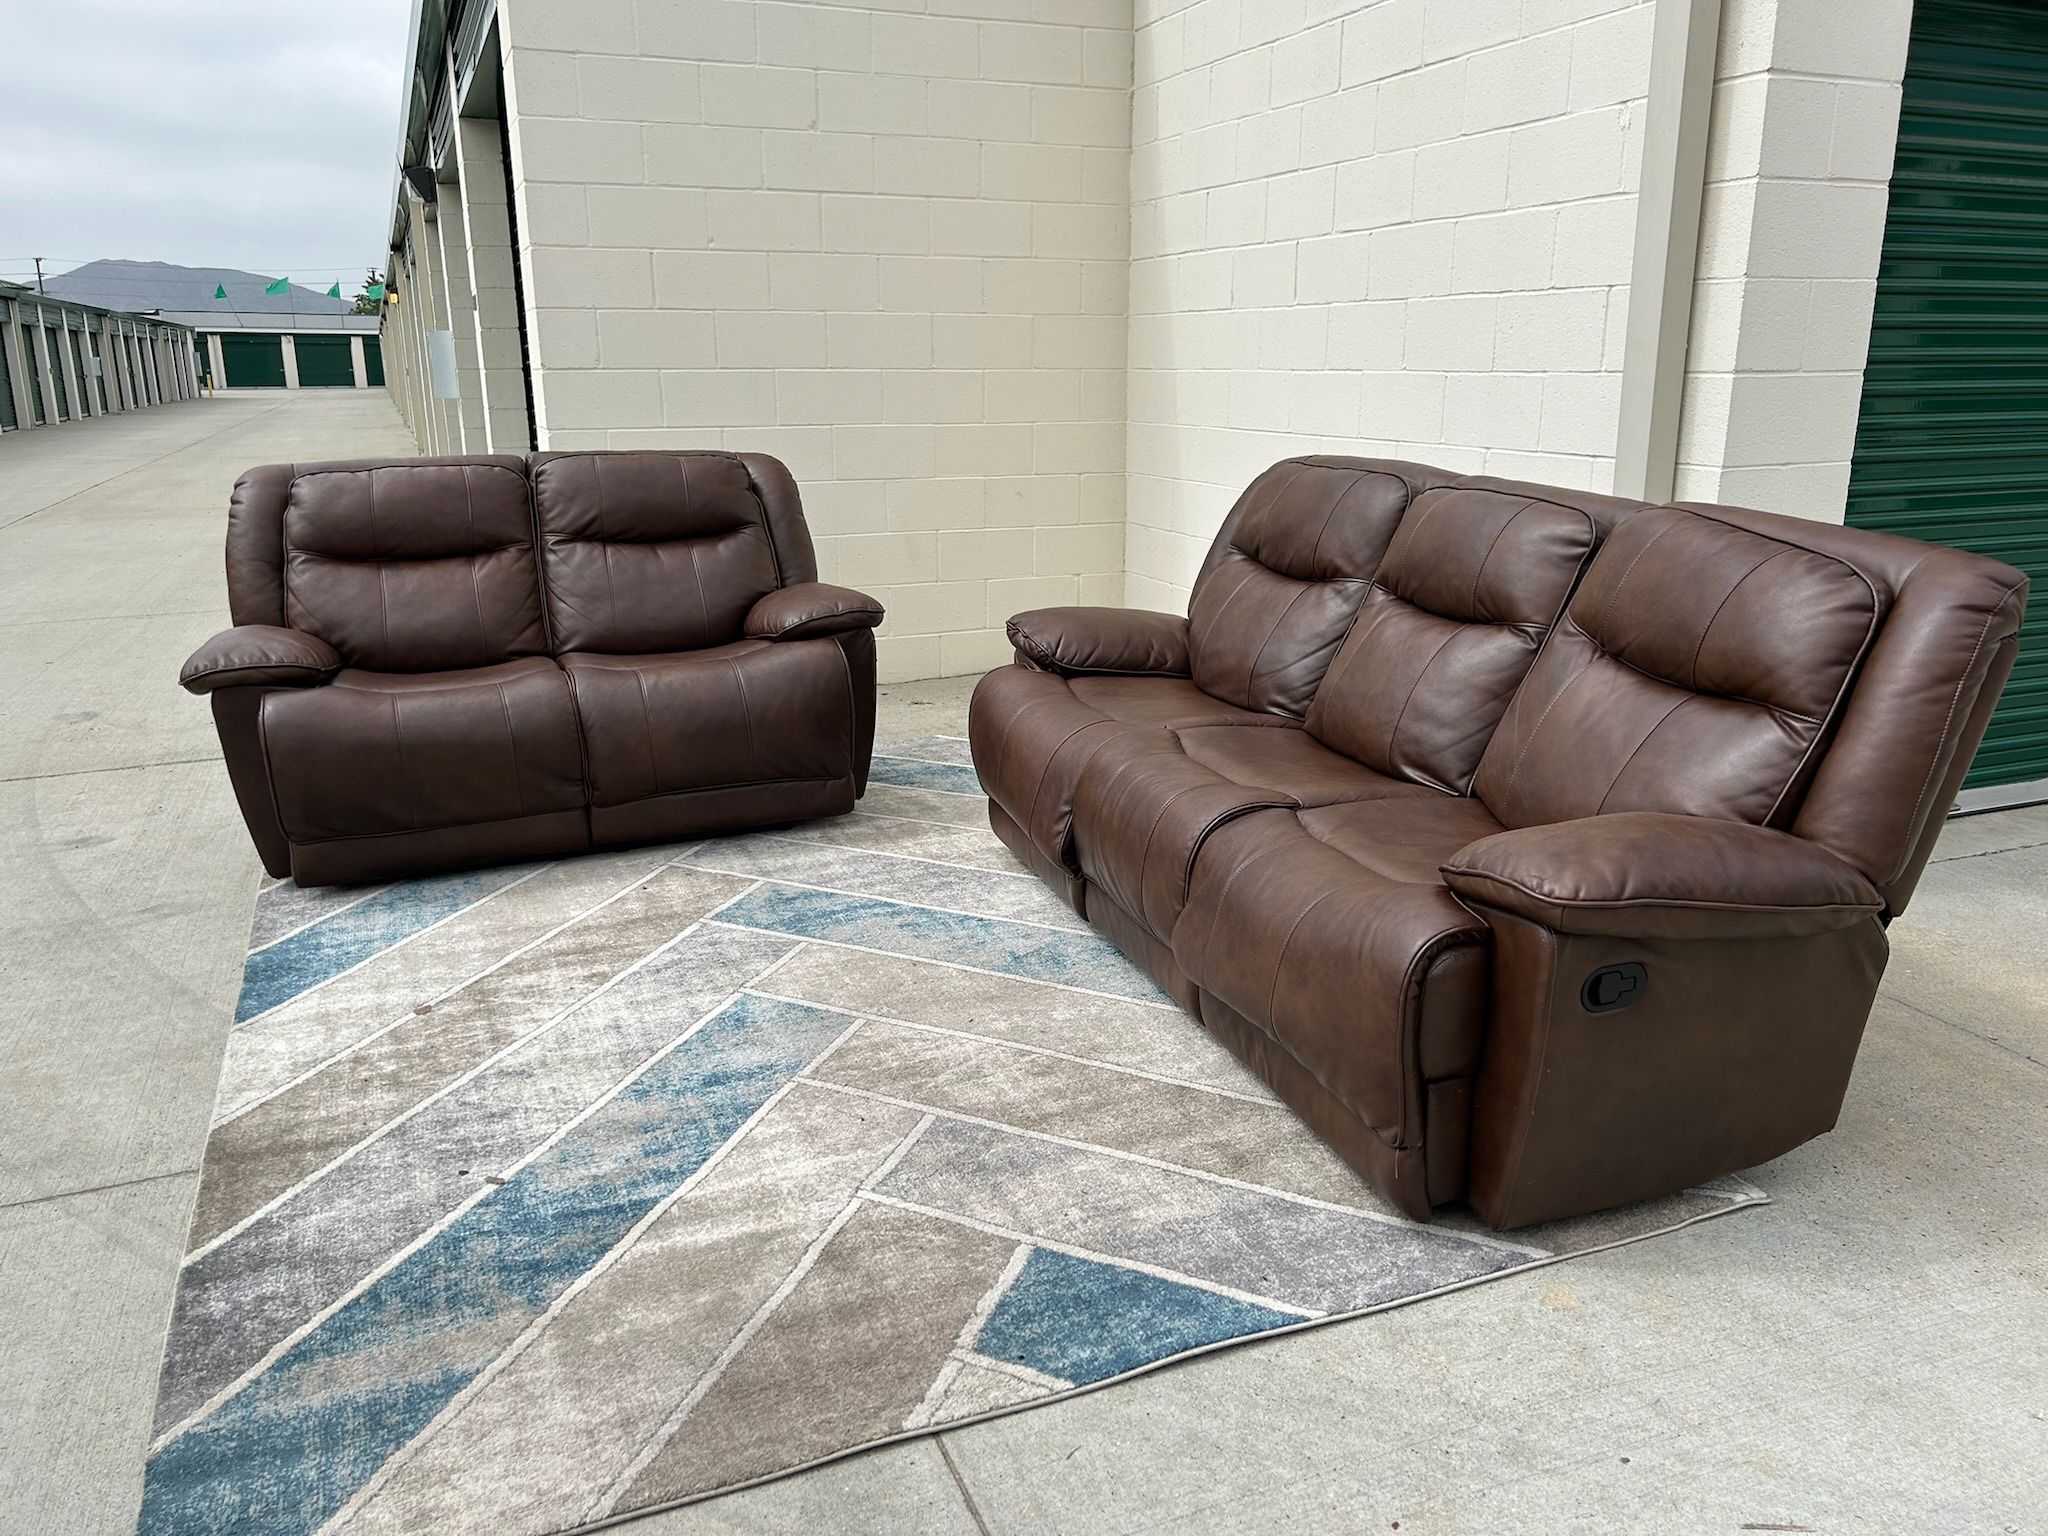 FREE DELIVERY ||  Leather Double Recliner Sofa and Loveseat Set || FREE INSTALL